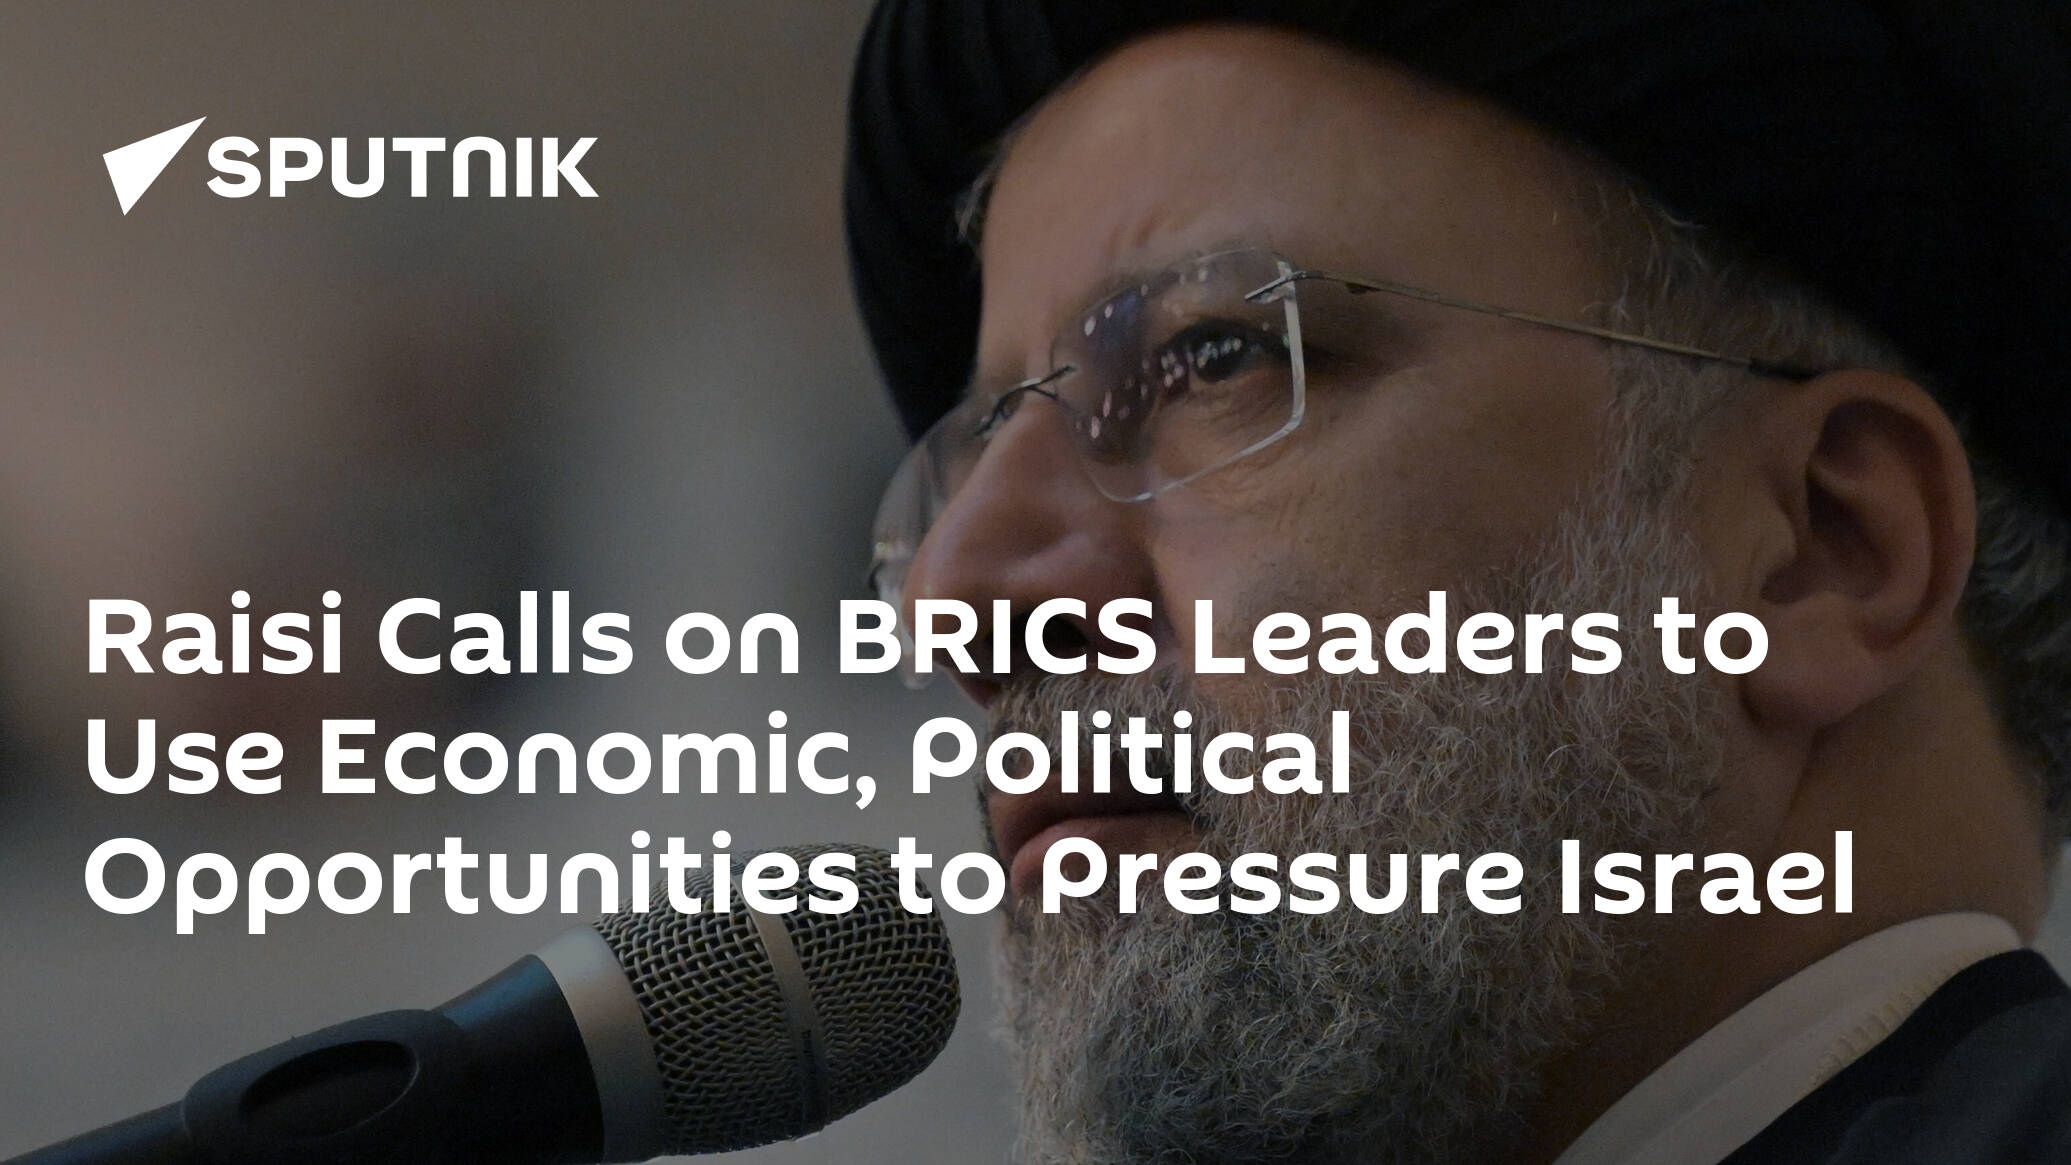 Raisi Calls on BRICS Leaders to Use Economic, Political Opportunities to Pressure Israel